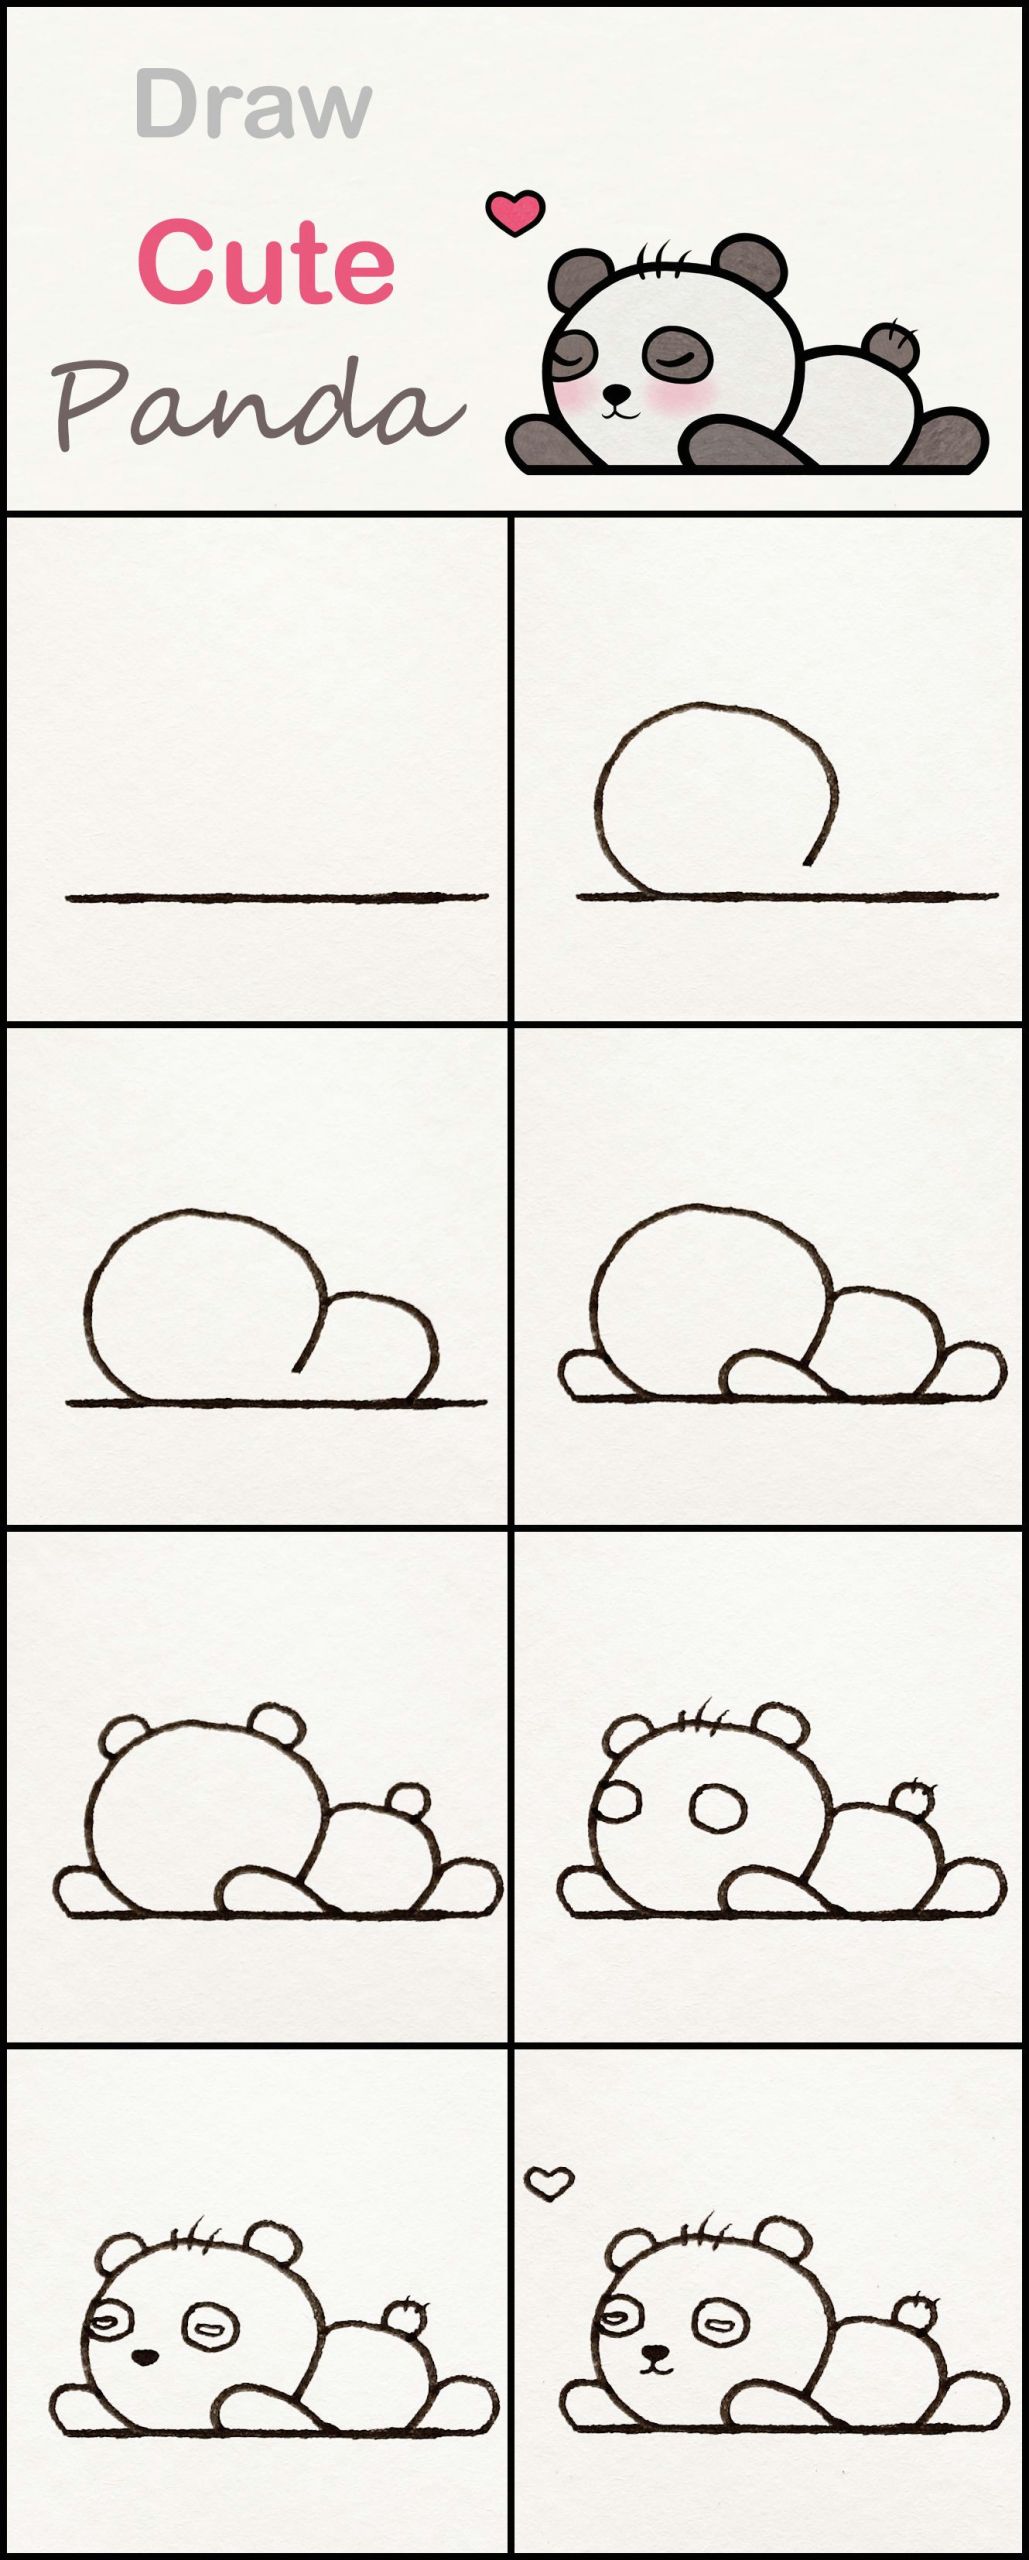 Kawaii Easy Cute Drawings Learn How to Draw A Cute Baby Panda Step by Step A Very